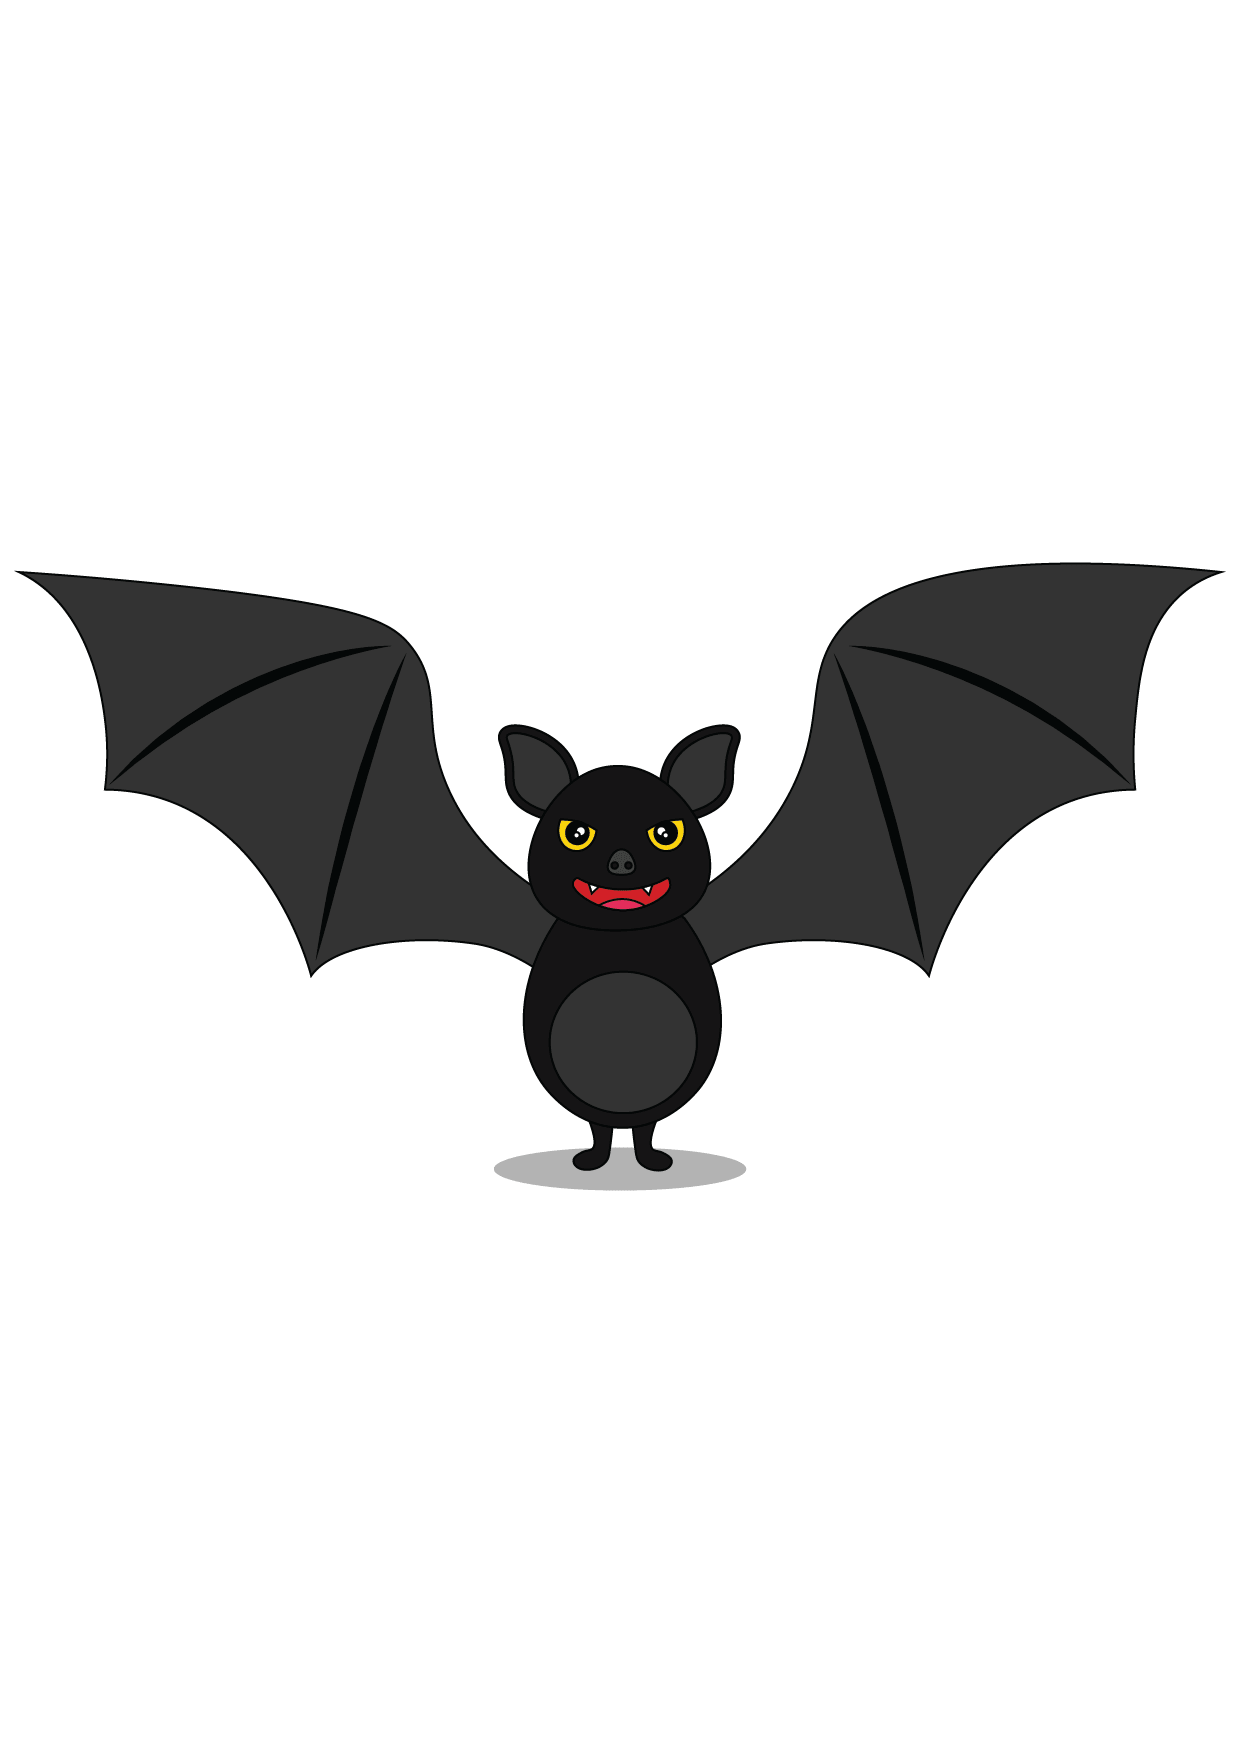 How to Draw A Bat Step by Step Printable